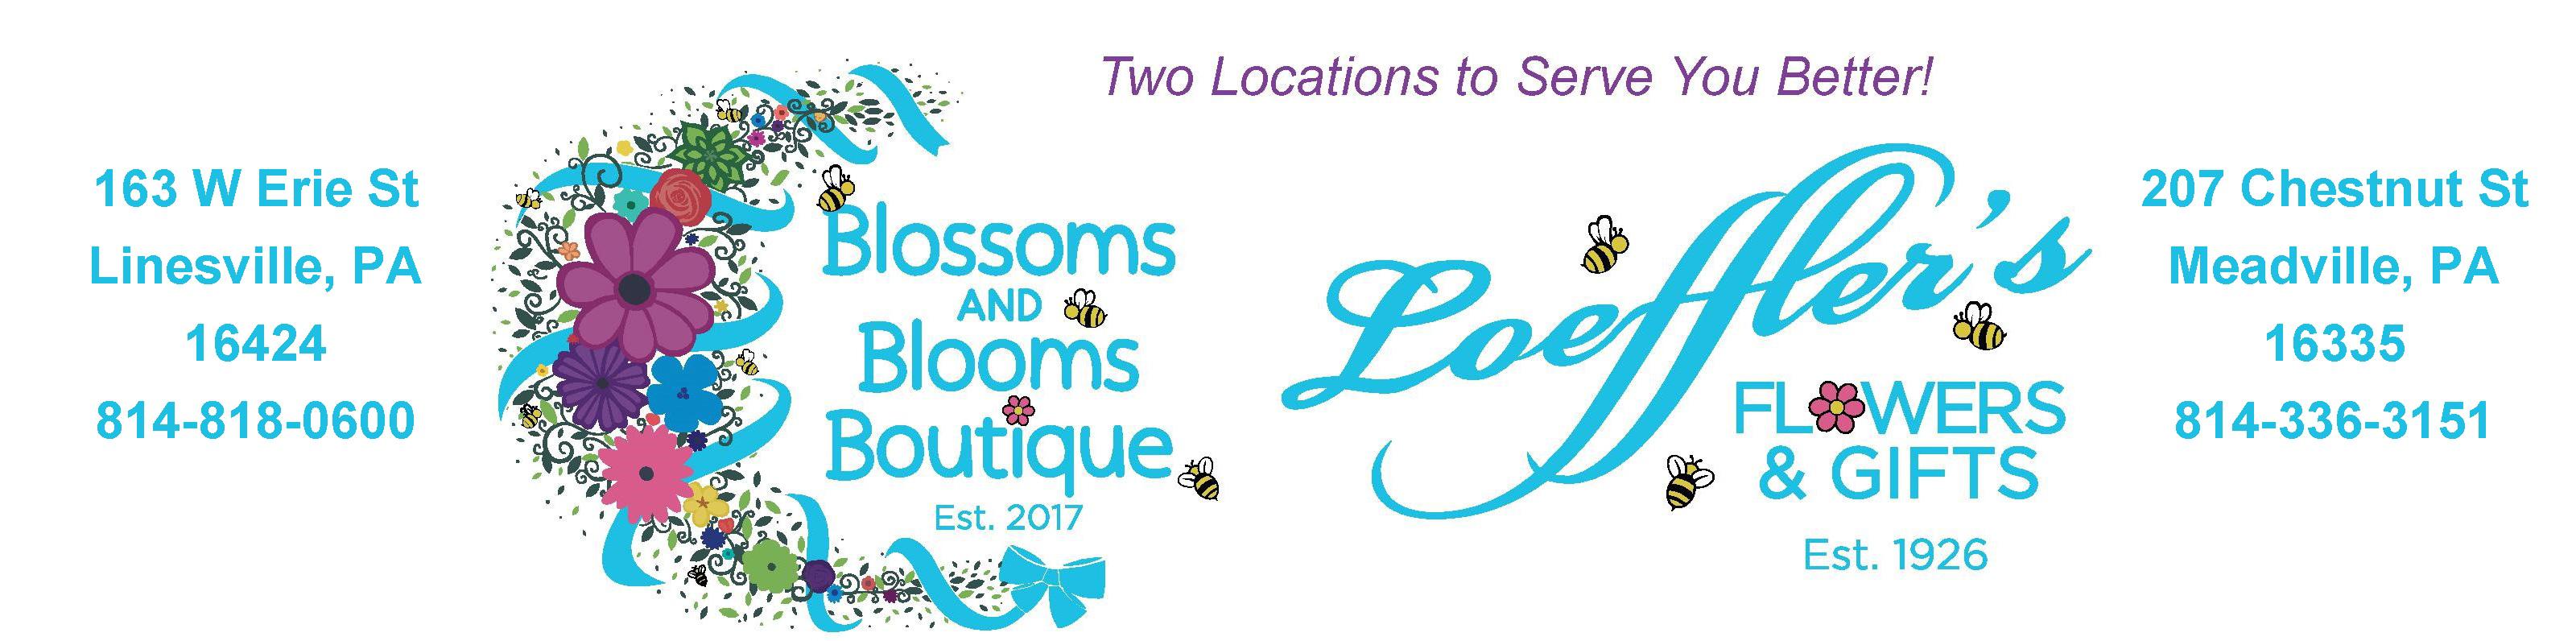 Loeffler's Flowers & Gifts - Meadville, PA 16335 - (814)336-3151 | ShowMeLocal.com